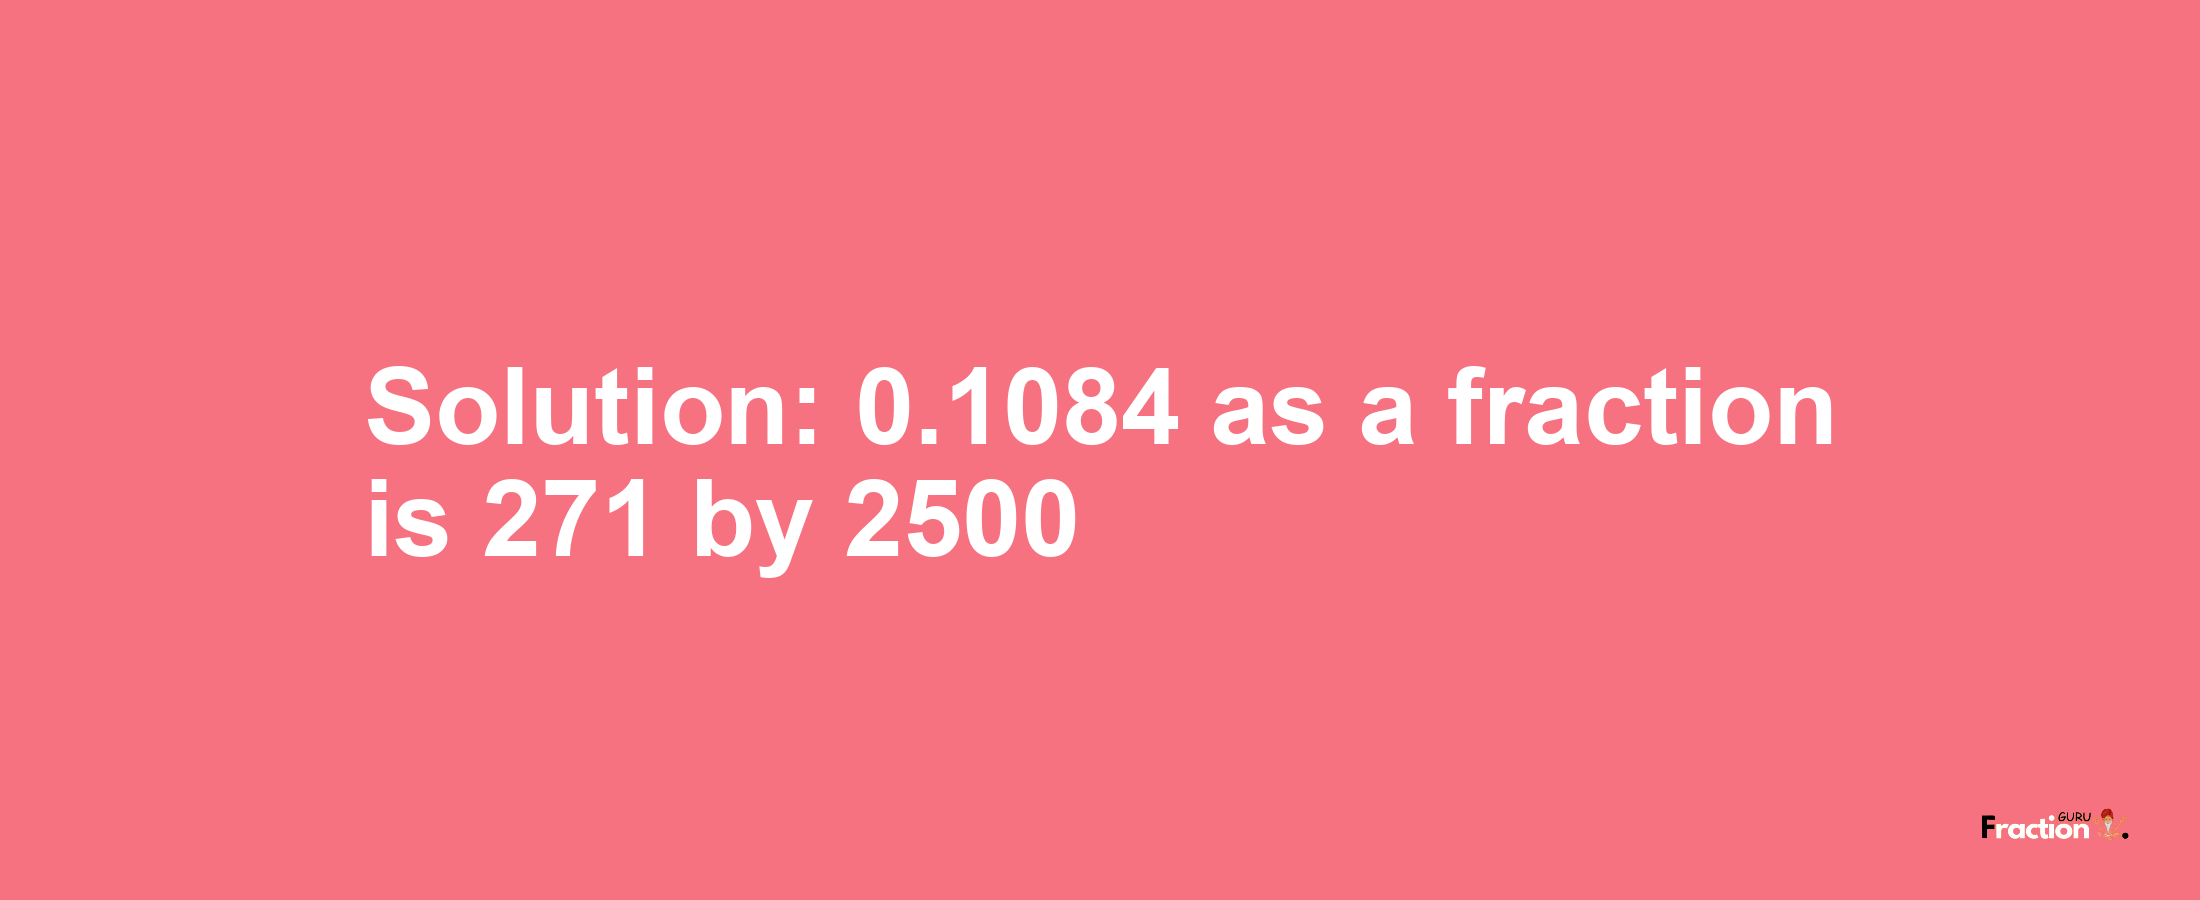 Solution:0.1084 as a fraction is 271/2500